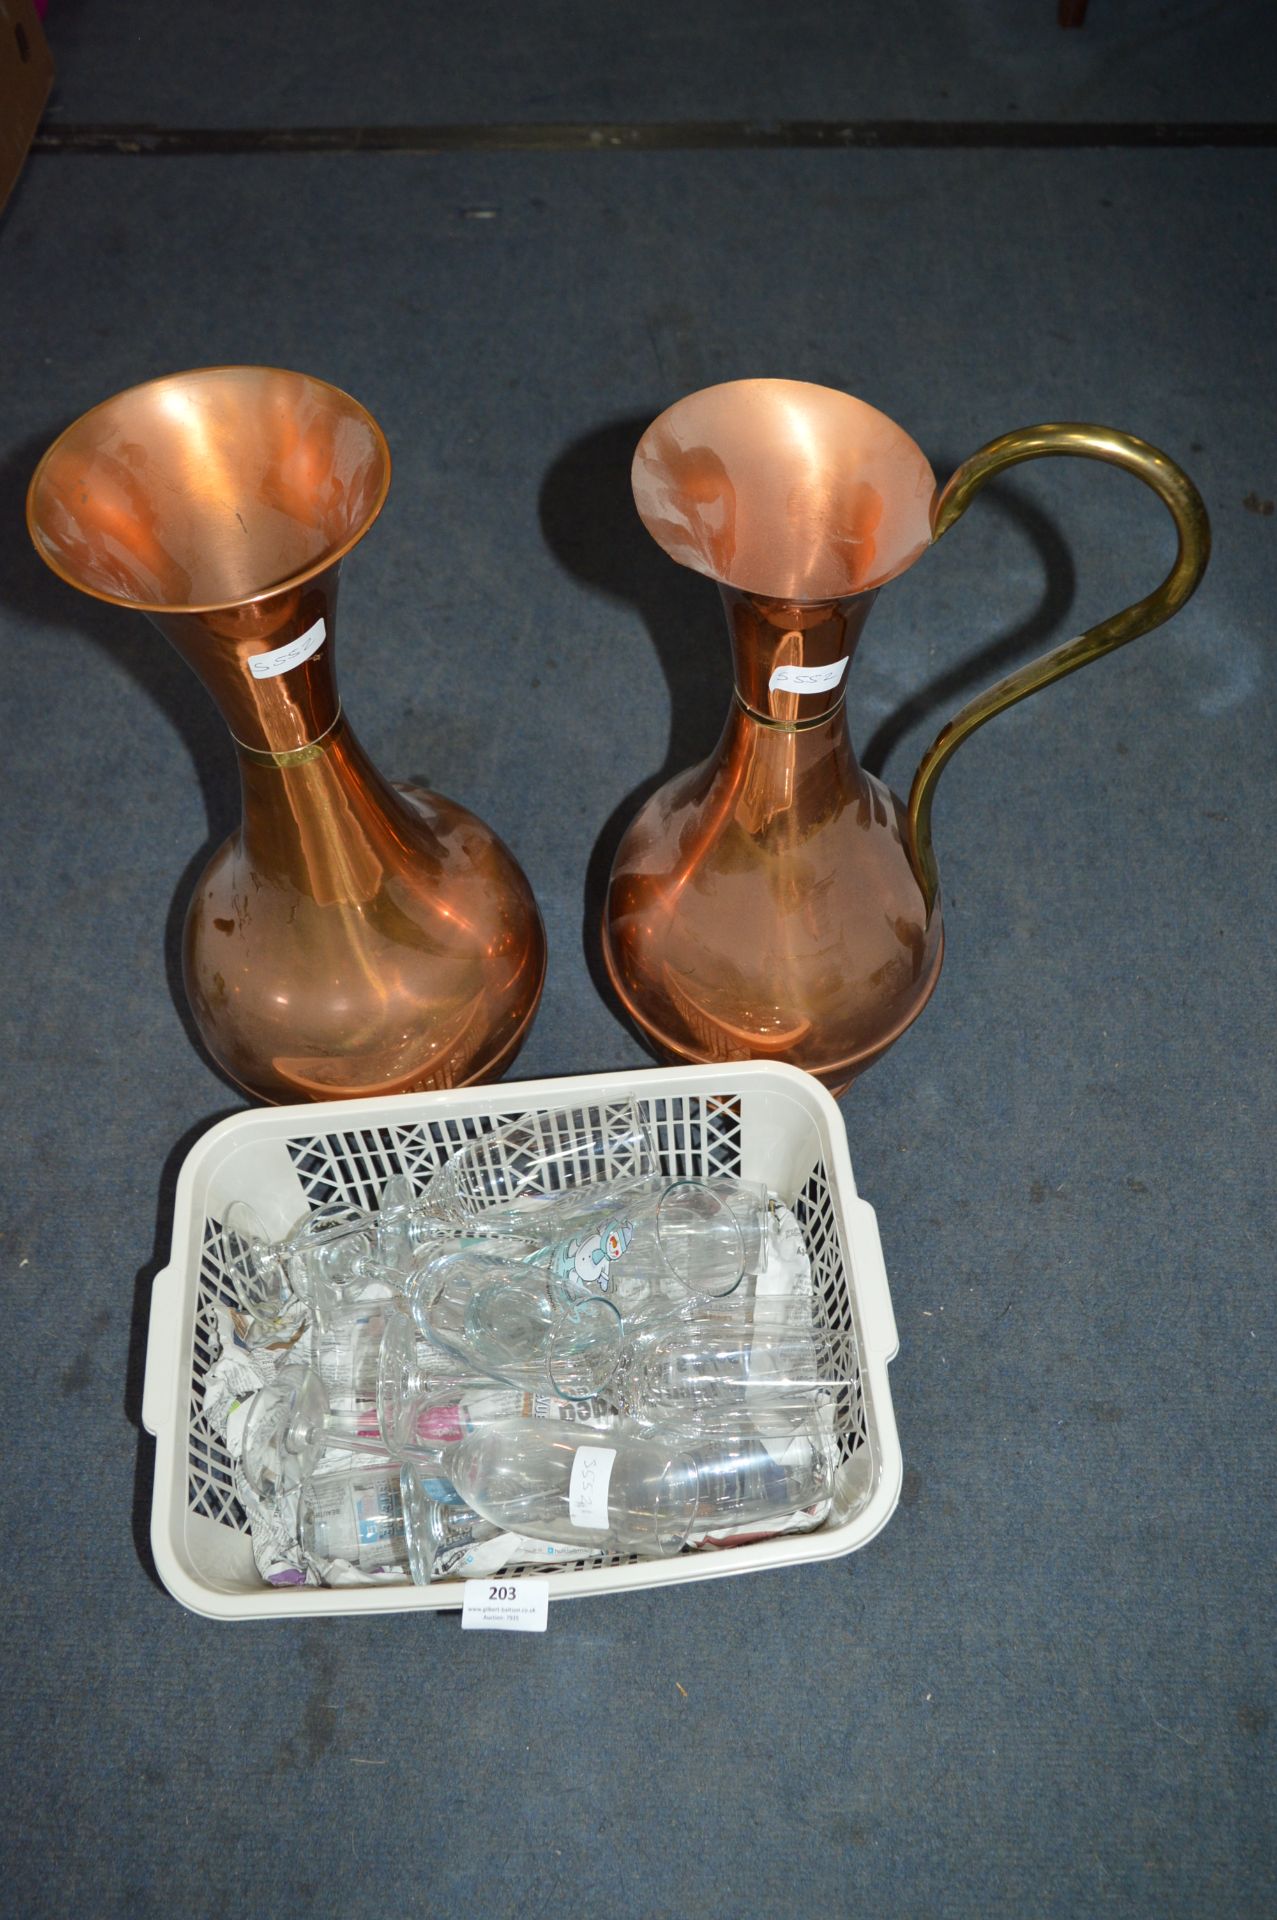 Drinking Glassware Flutes and Two Large Copper Vases